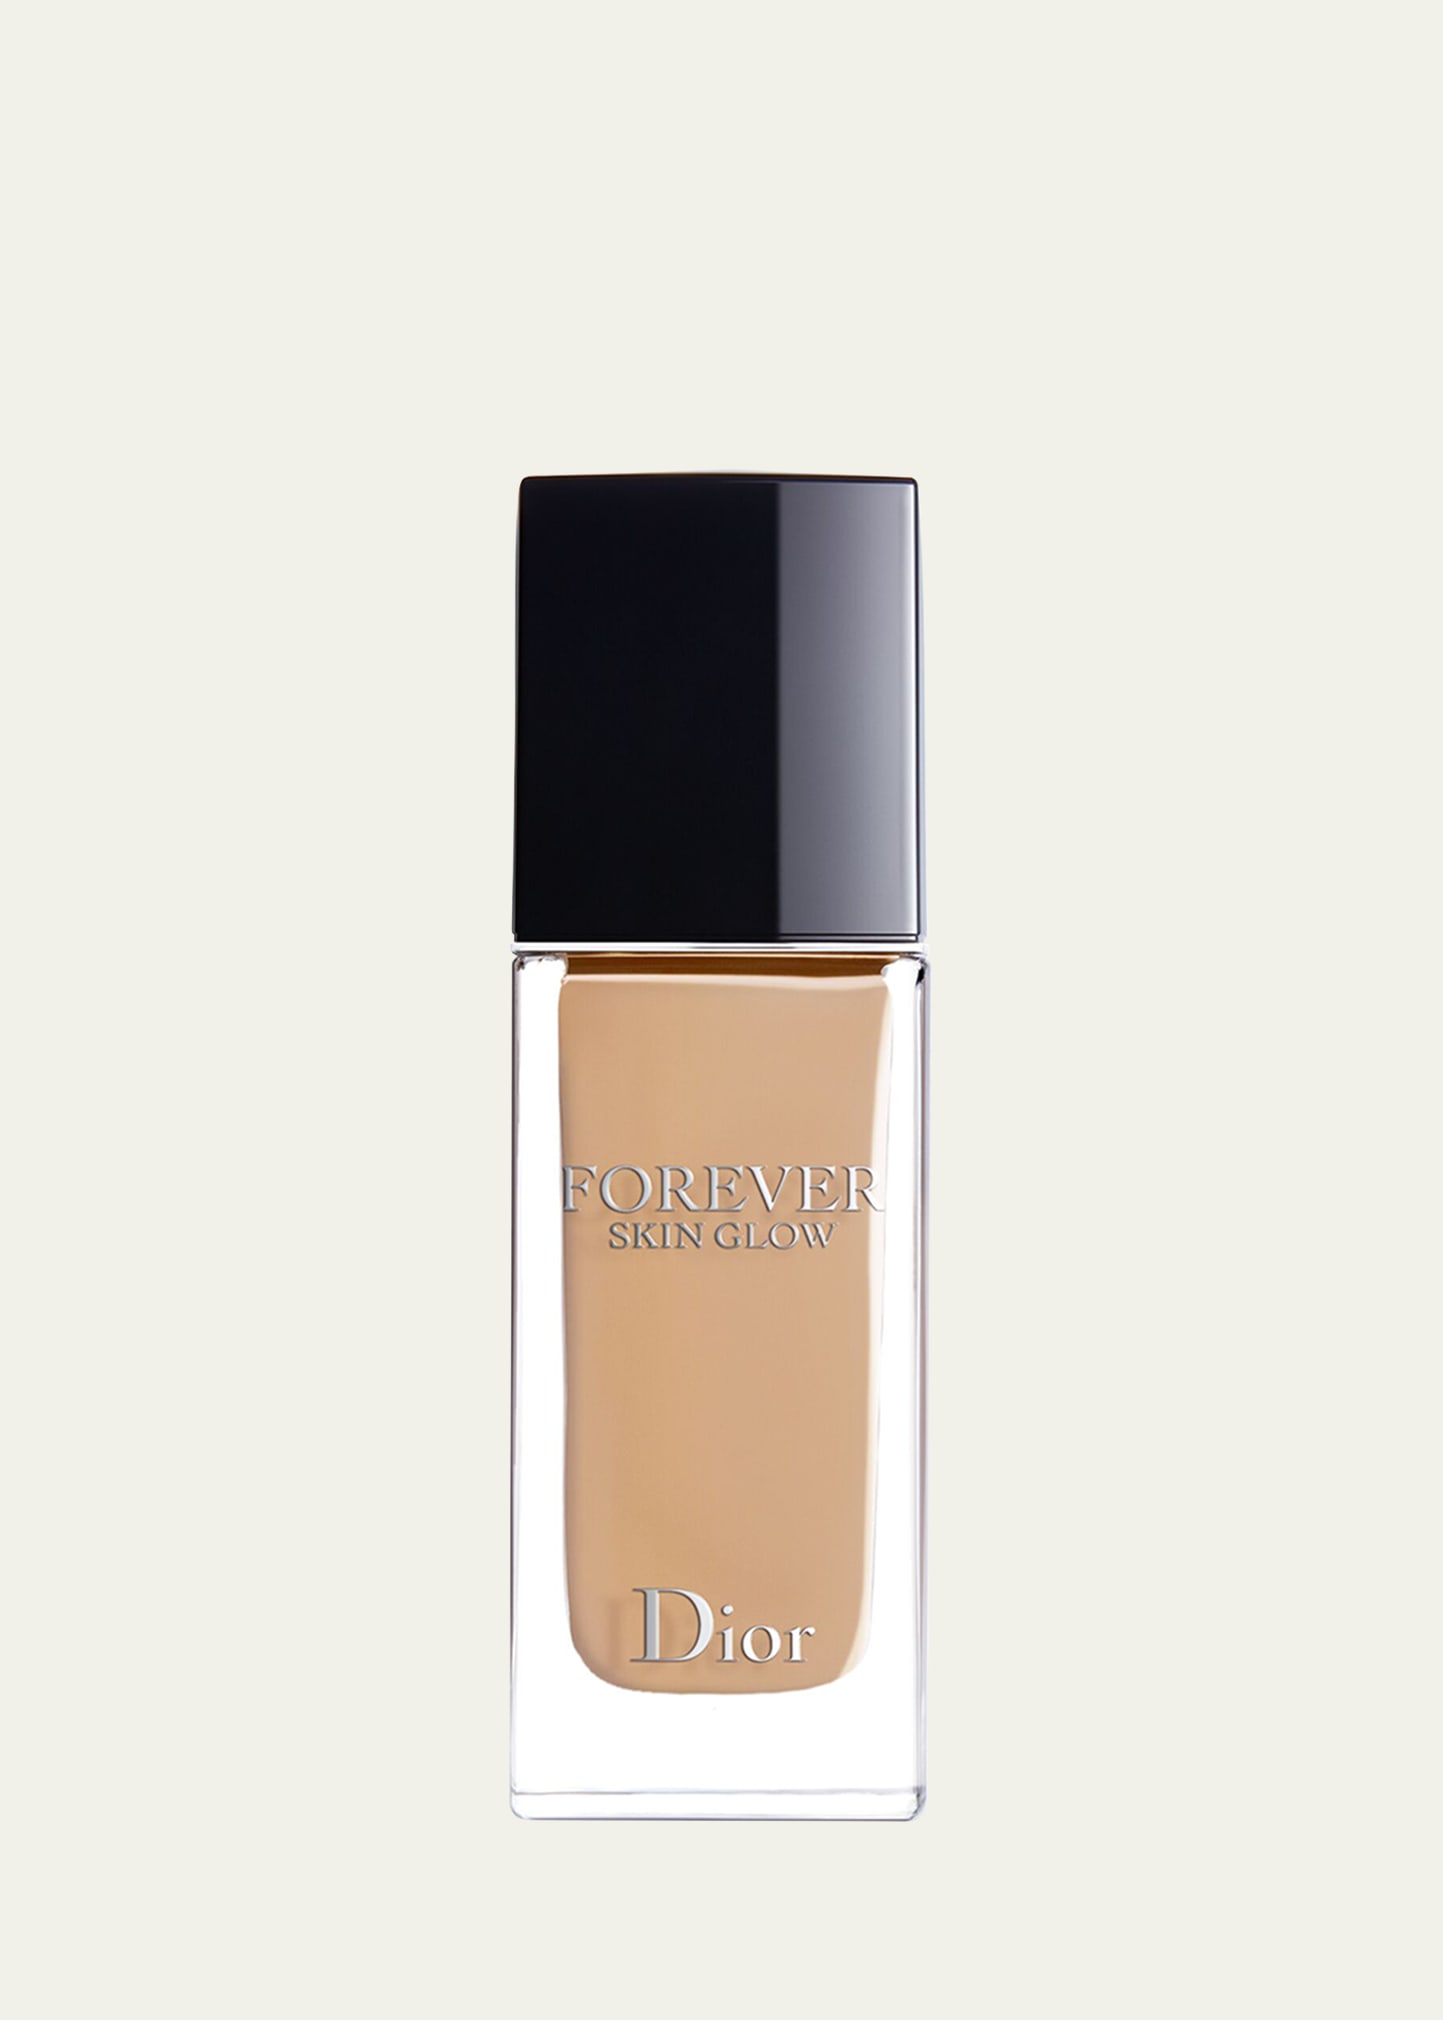 Dior 1 Oz.  Forever Skin Glow Hydrating Foundation Spf 15 In 4 Cool